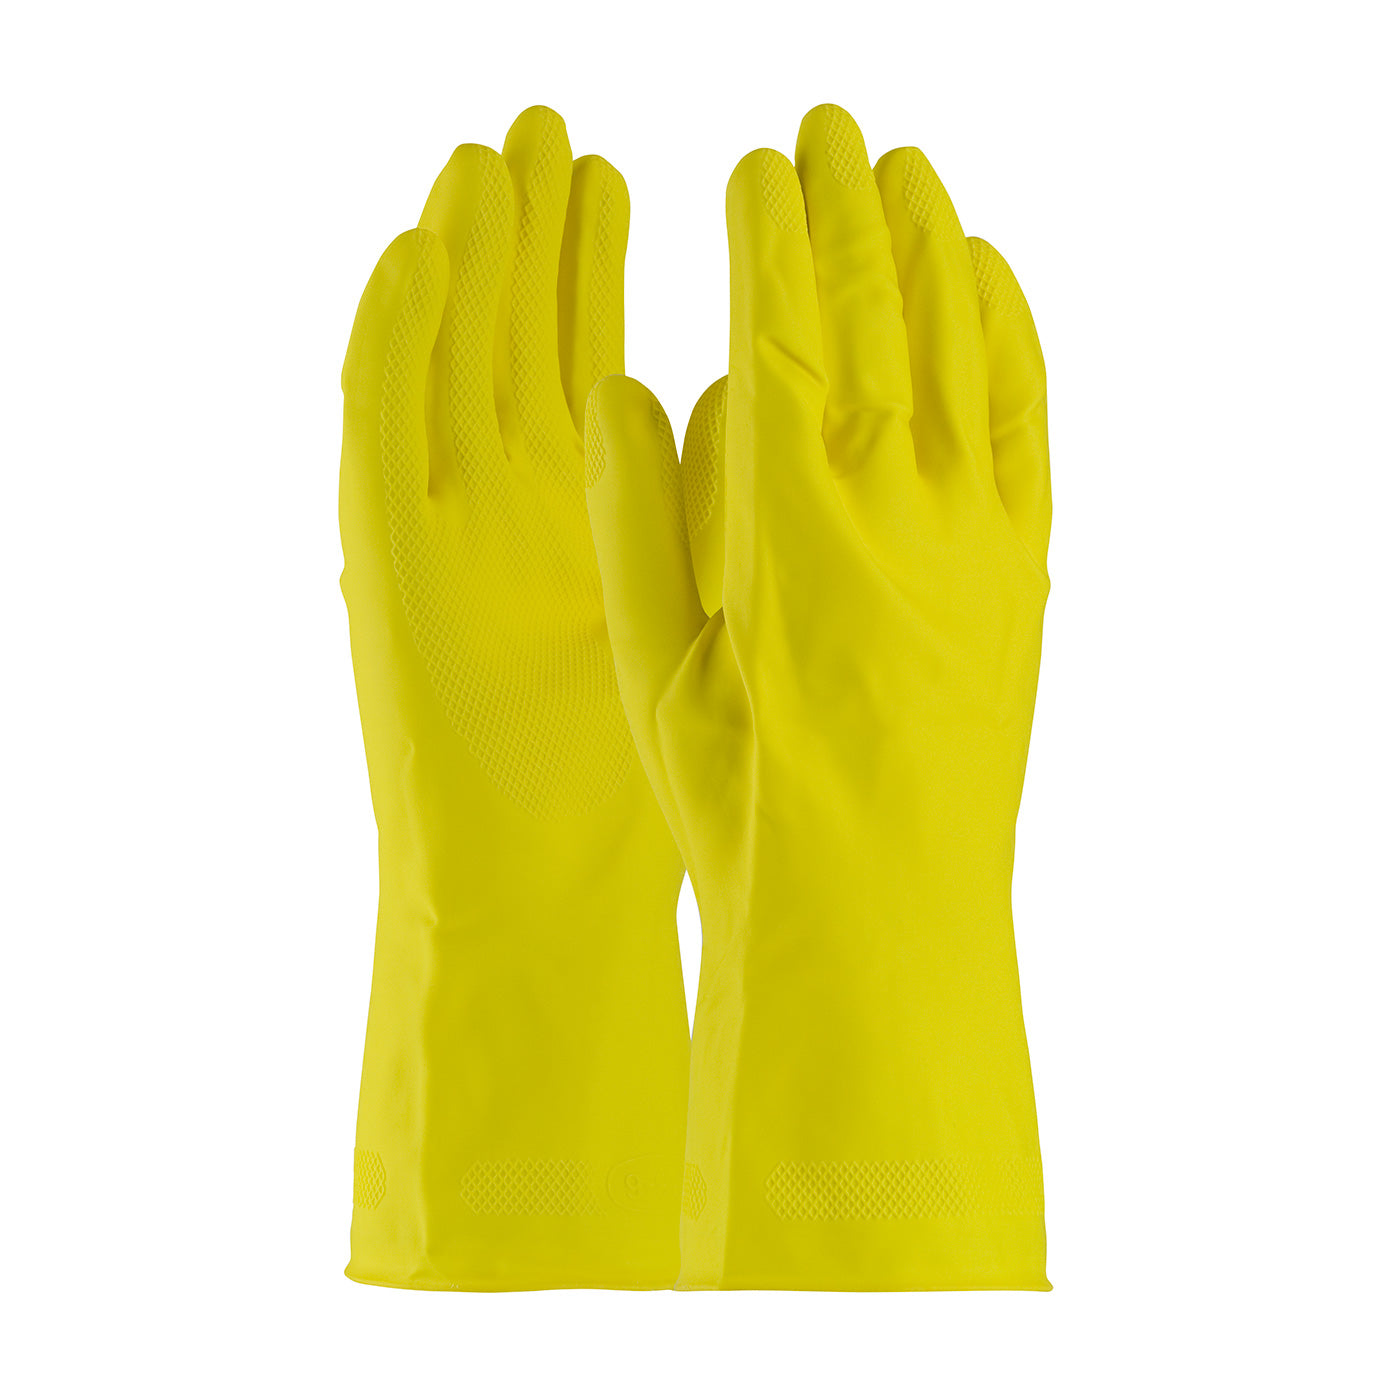 Yellow Latex Gloves 21-mil Flock Lined with Raised Diamond Grip - Pack of 12 Pairs